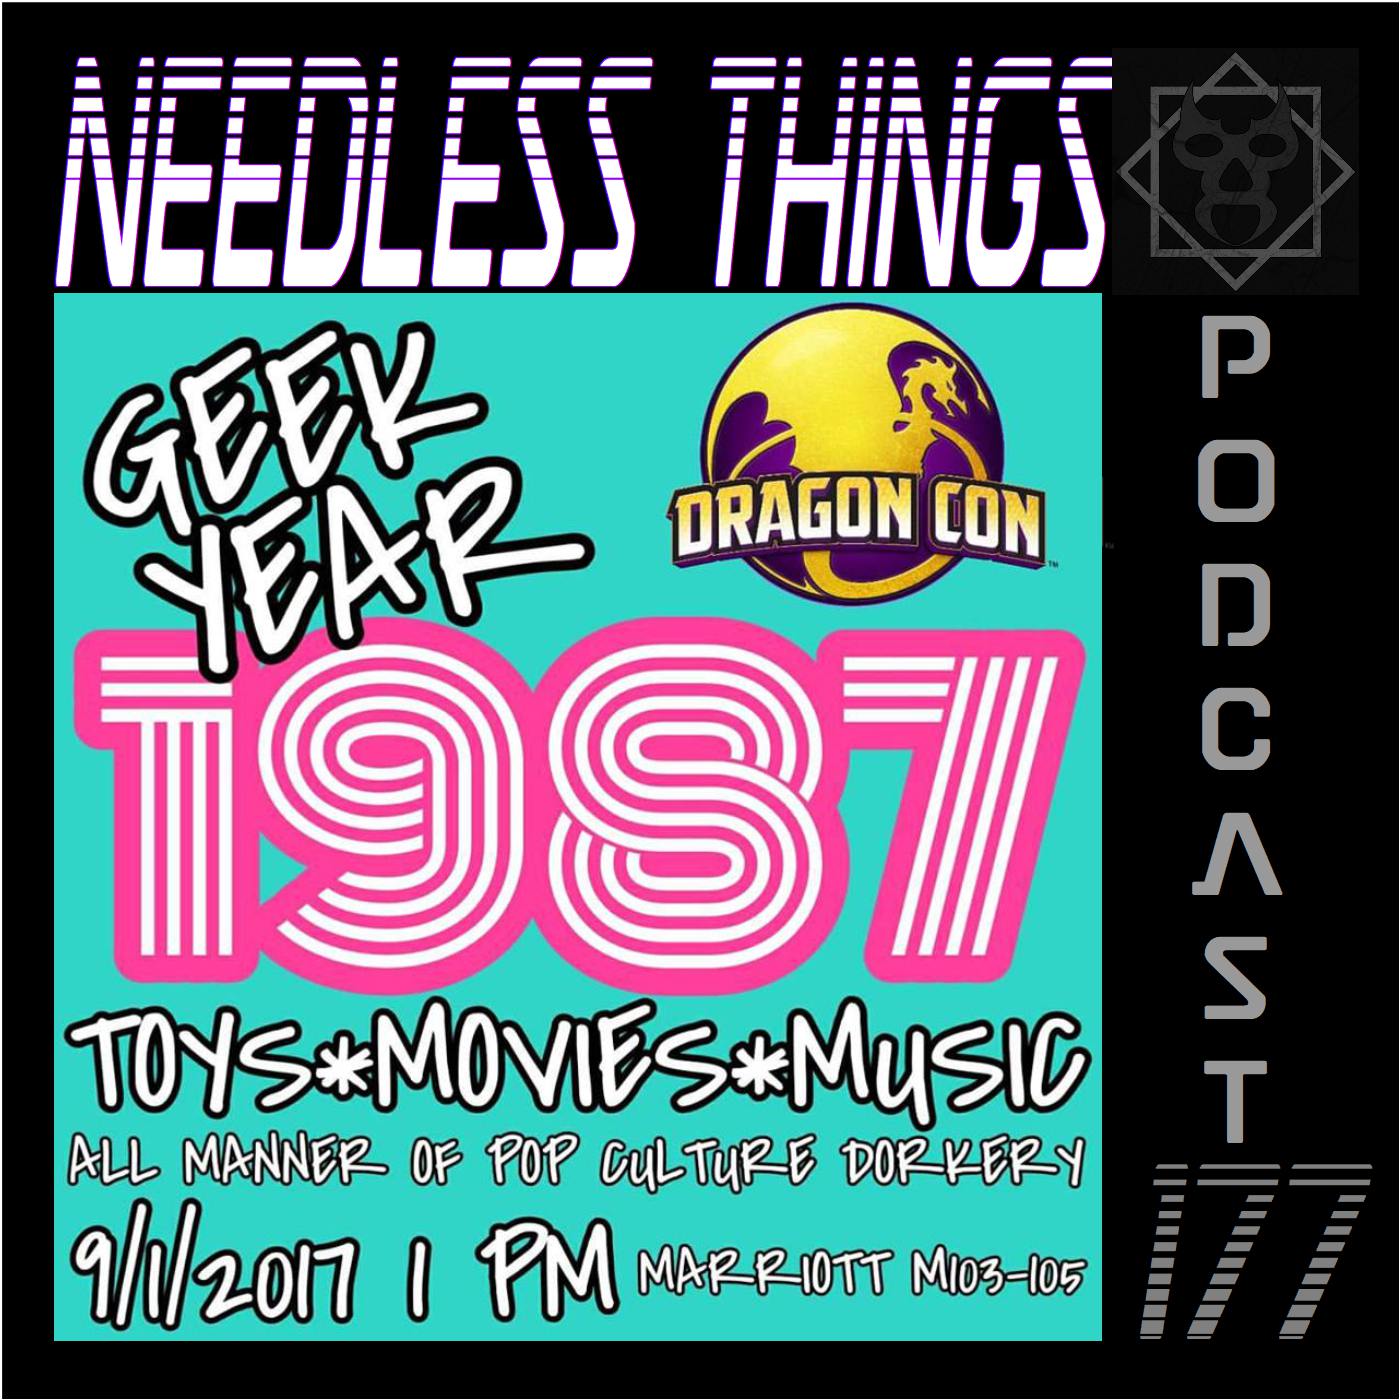 Needless Things Podcast 177 – 1987: Live from Dragon Con